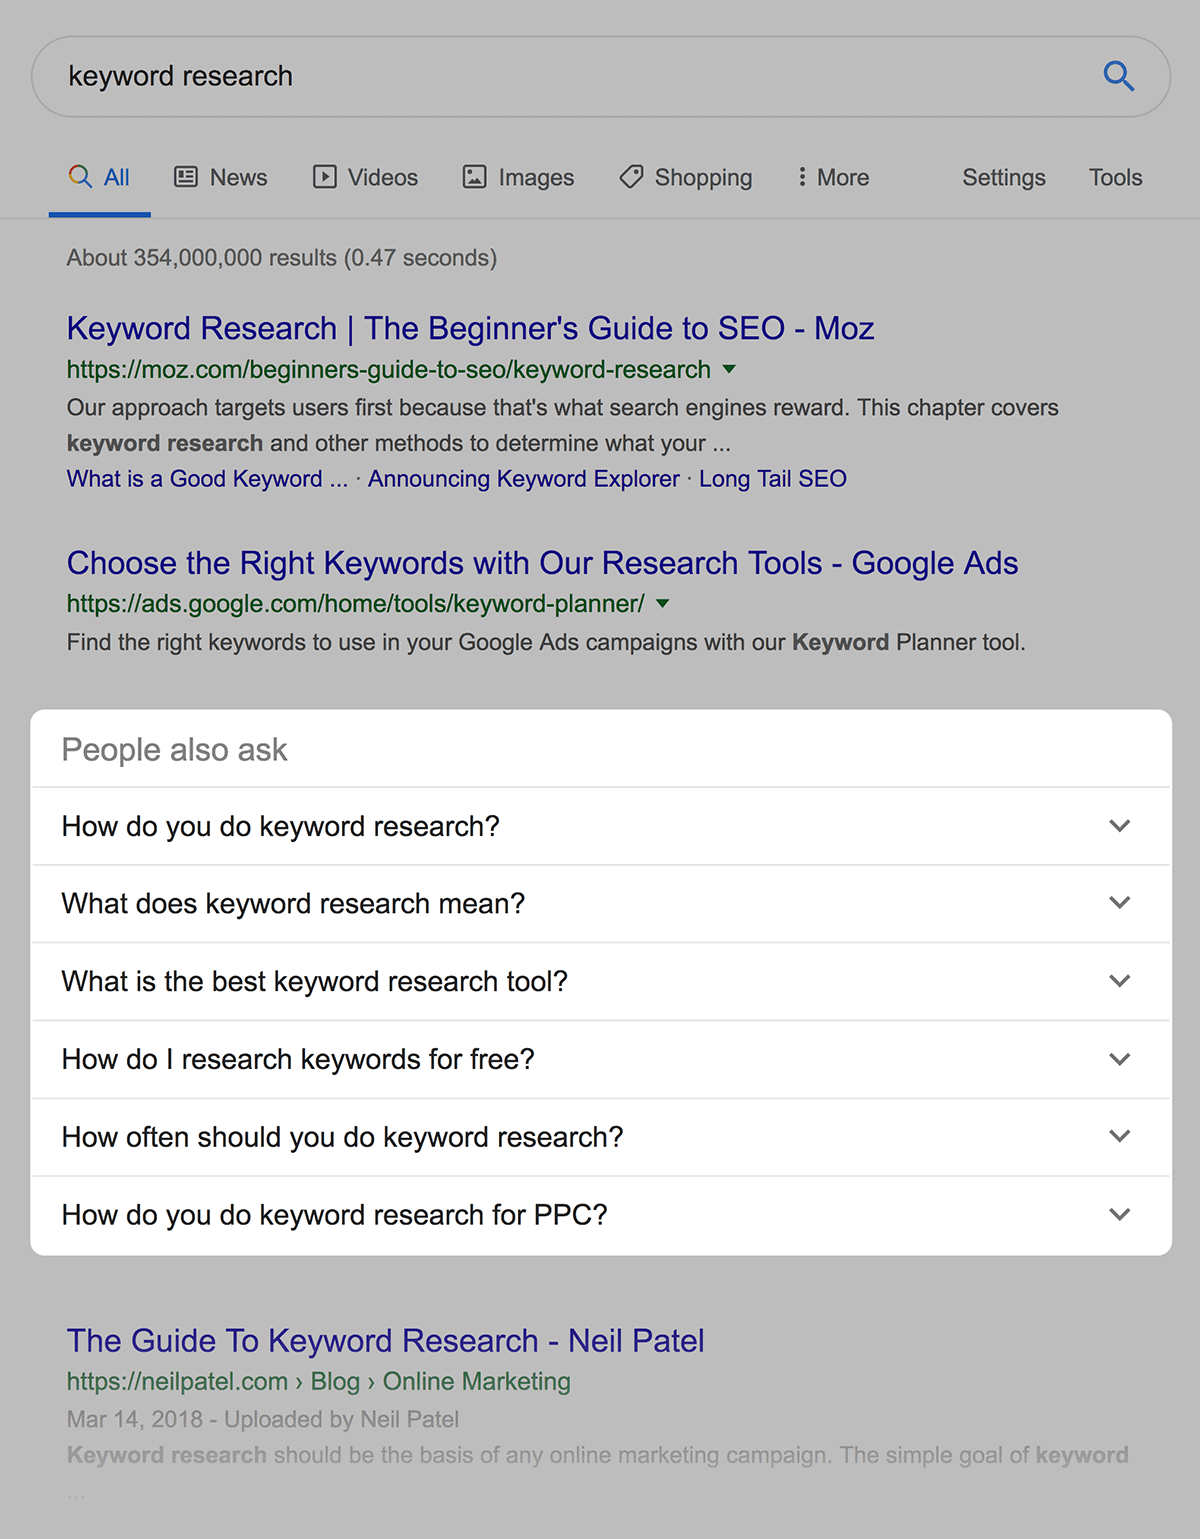 people also ask keyword research